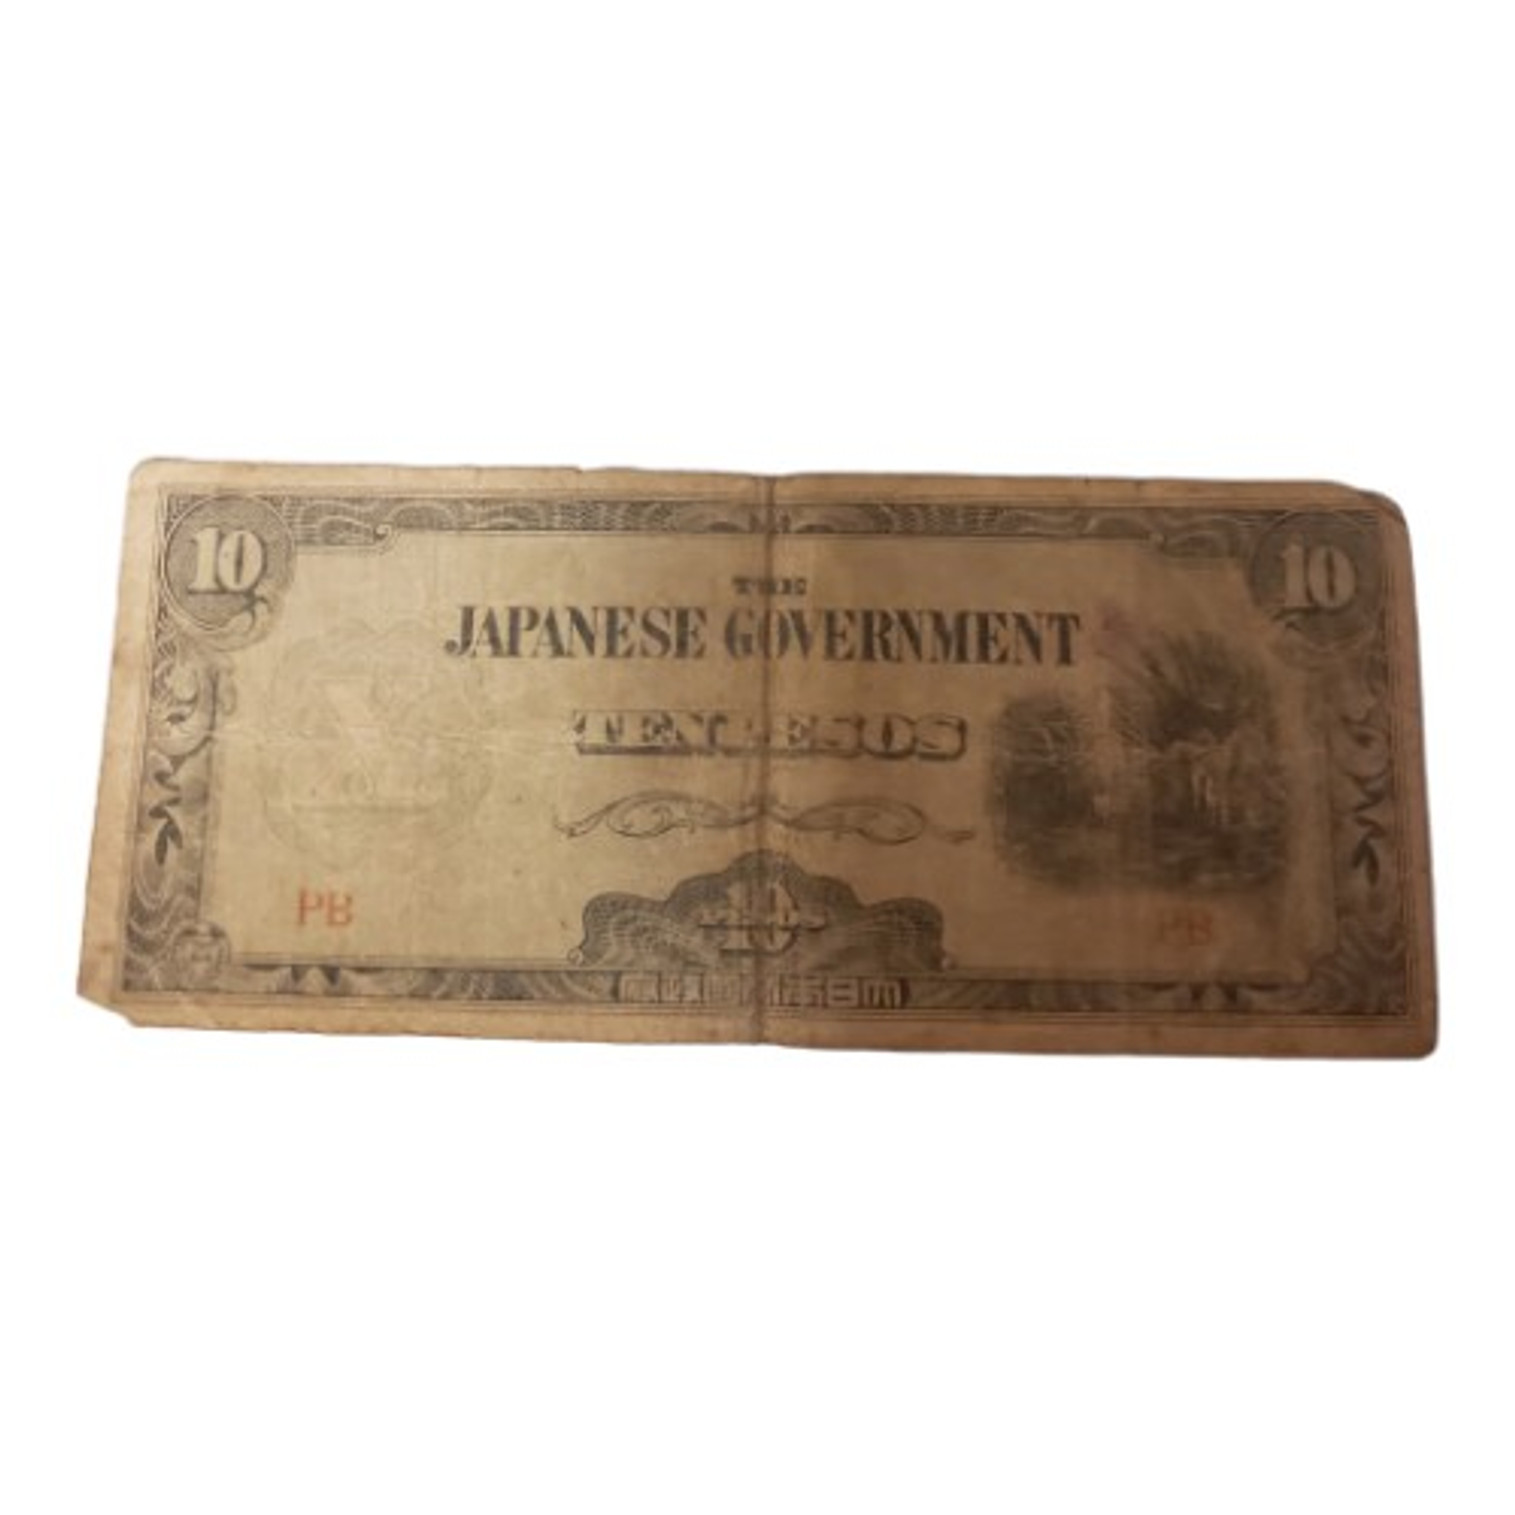 WW2 Japanese Occupation Government 10 pesos Banknote